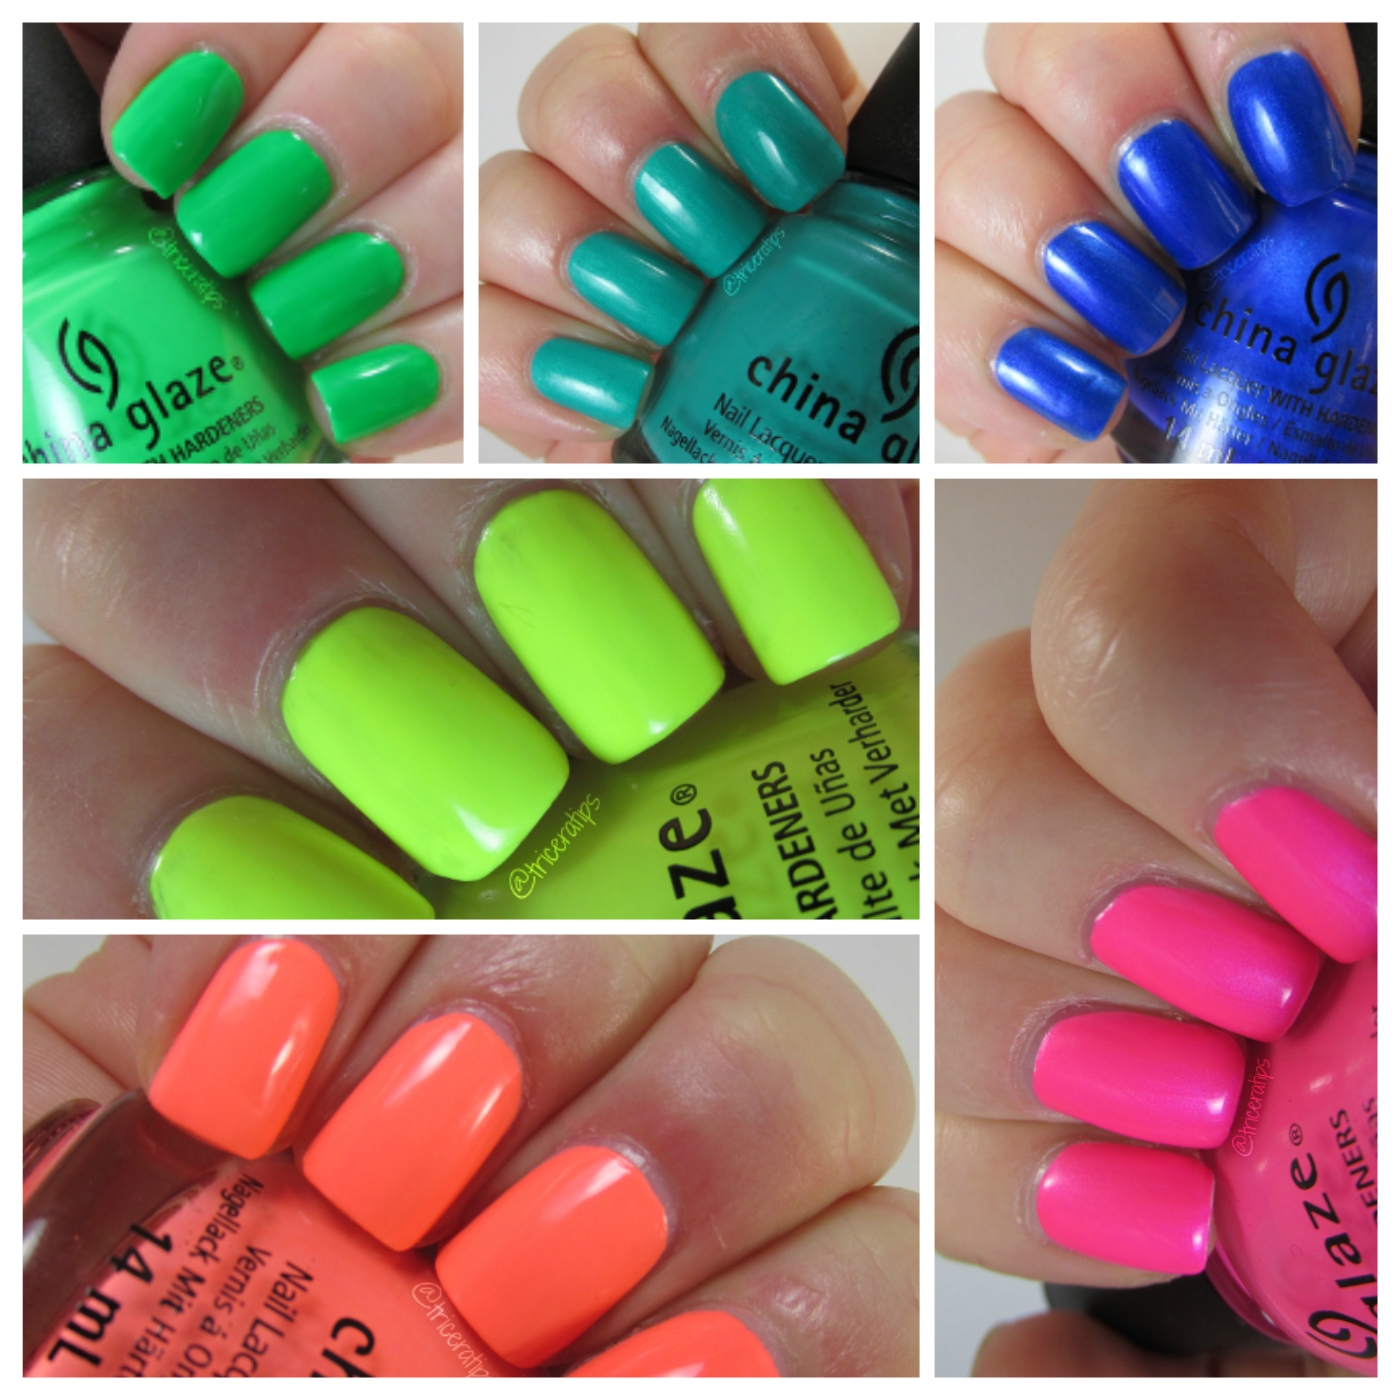 China Glaze Neon Swatches – Cross-Country Beauty